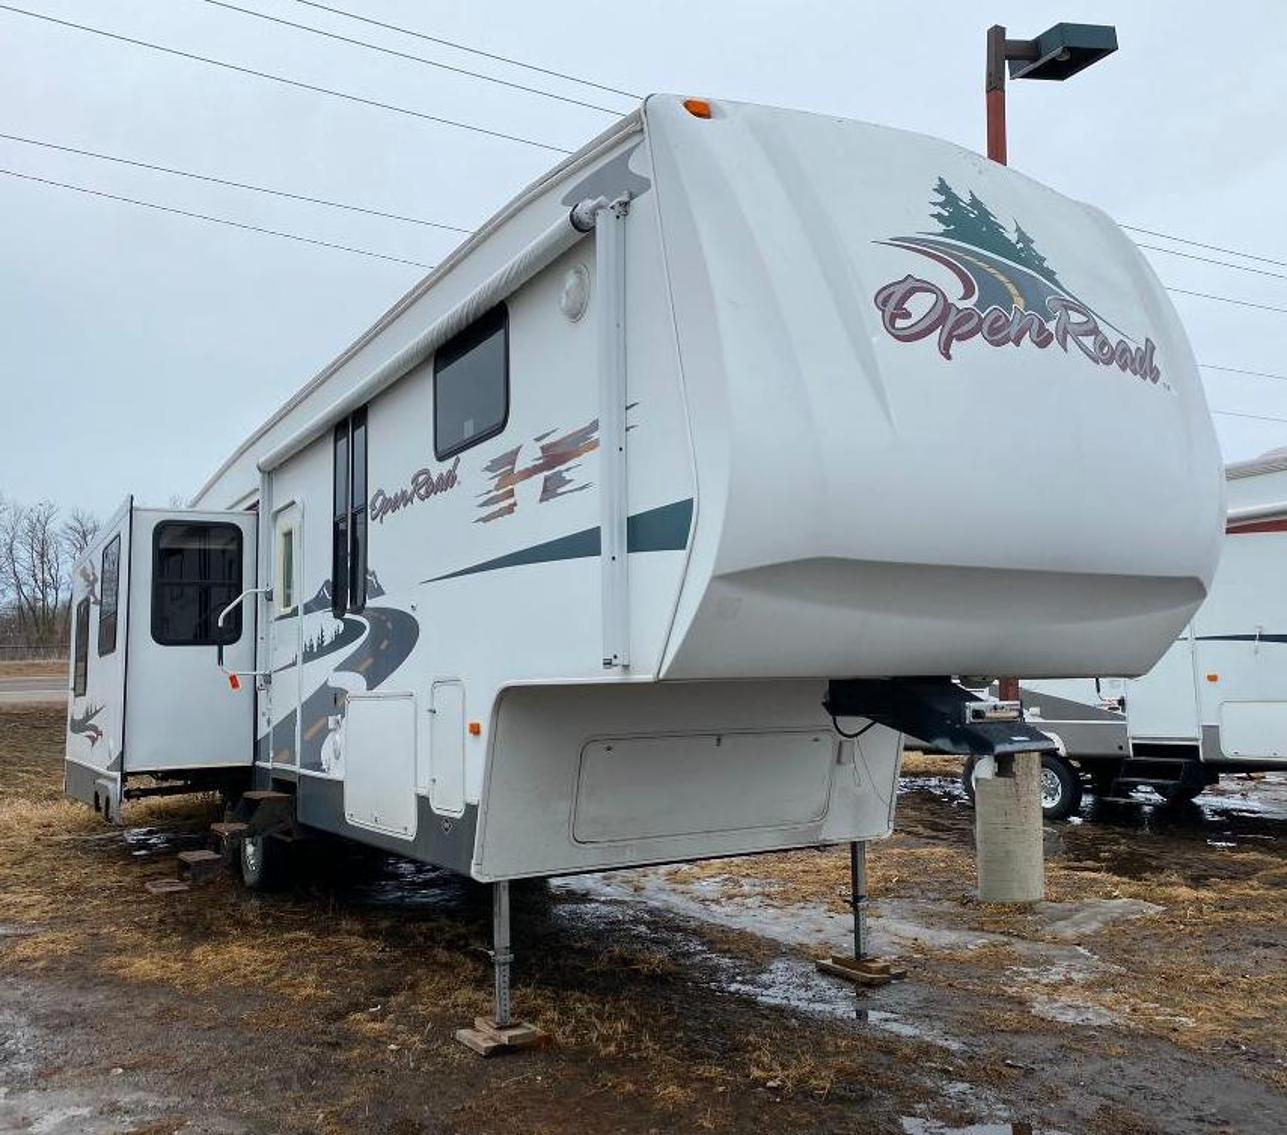 33 Campers: (1) Park Model, (14) 5th Wheels,  (18) Travel Trailers